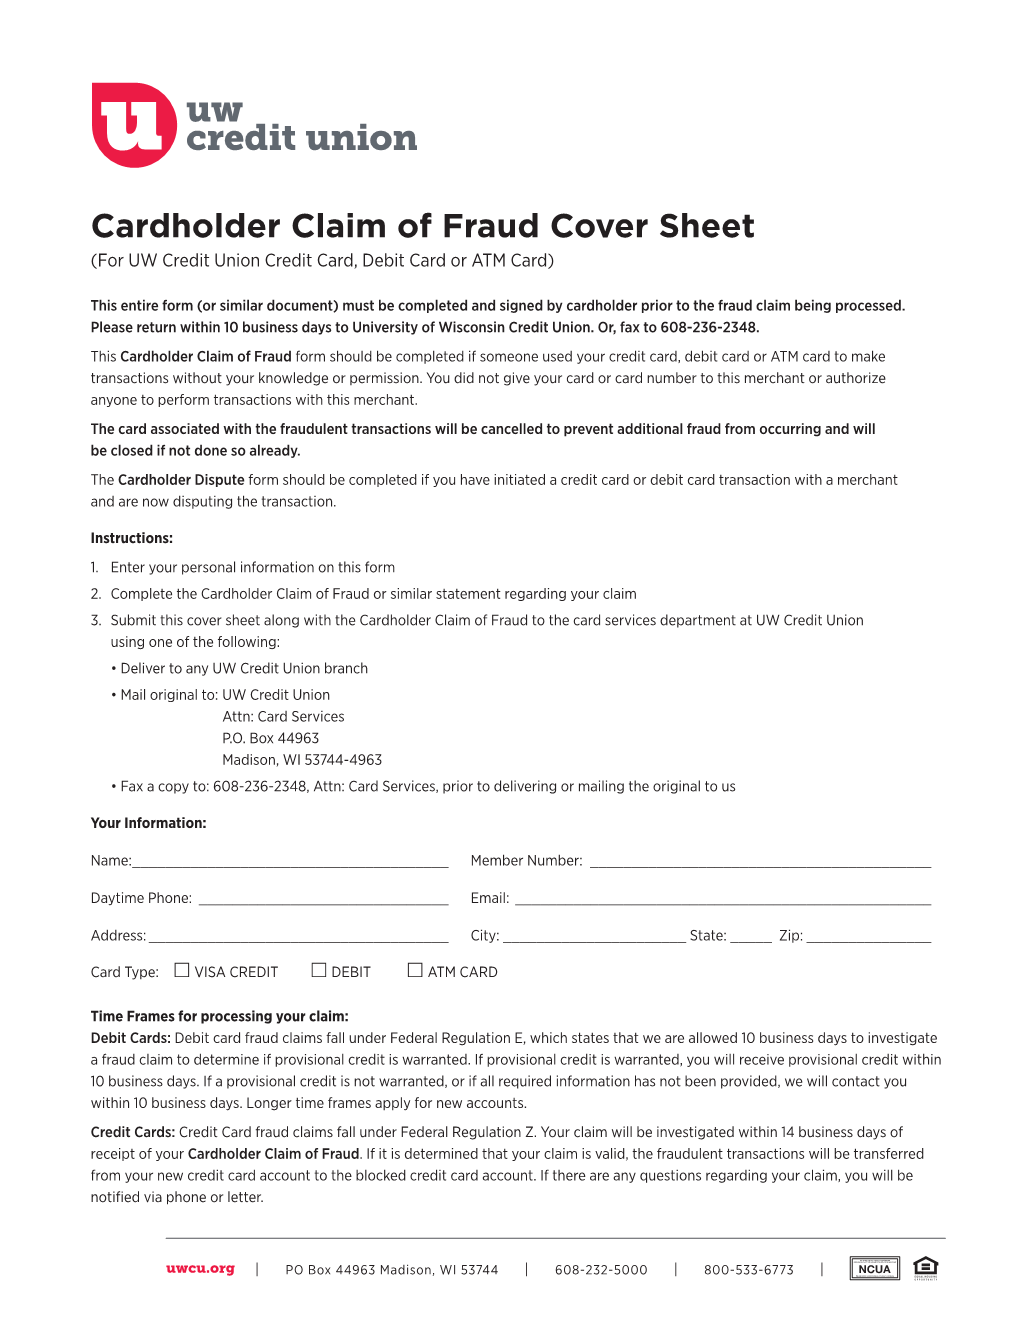 Cardholder Claim of Fraud Cover Sheet (For UW Credit Union Credit Card, Debit Card Or ATM Card)